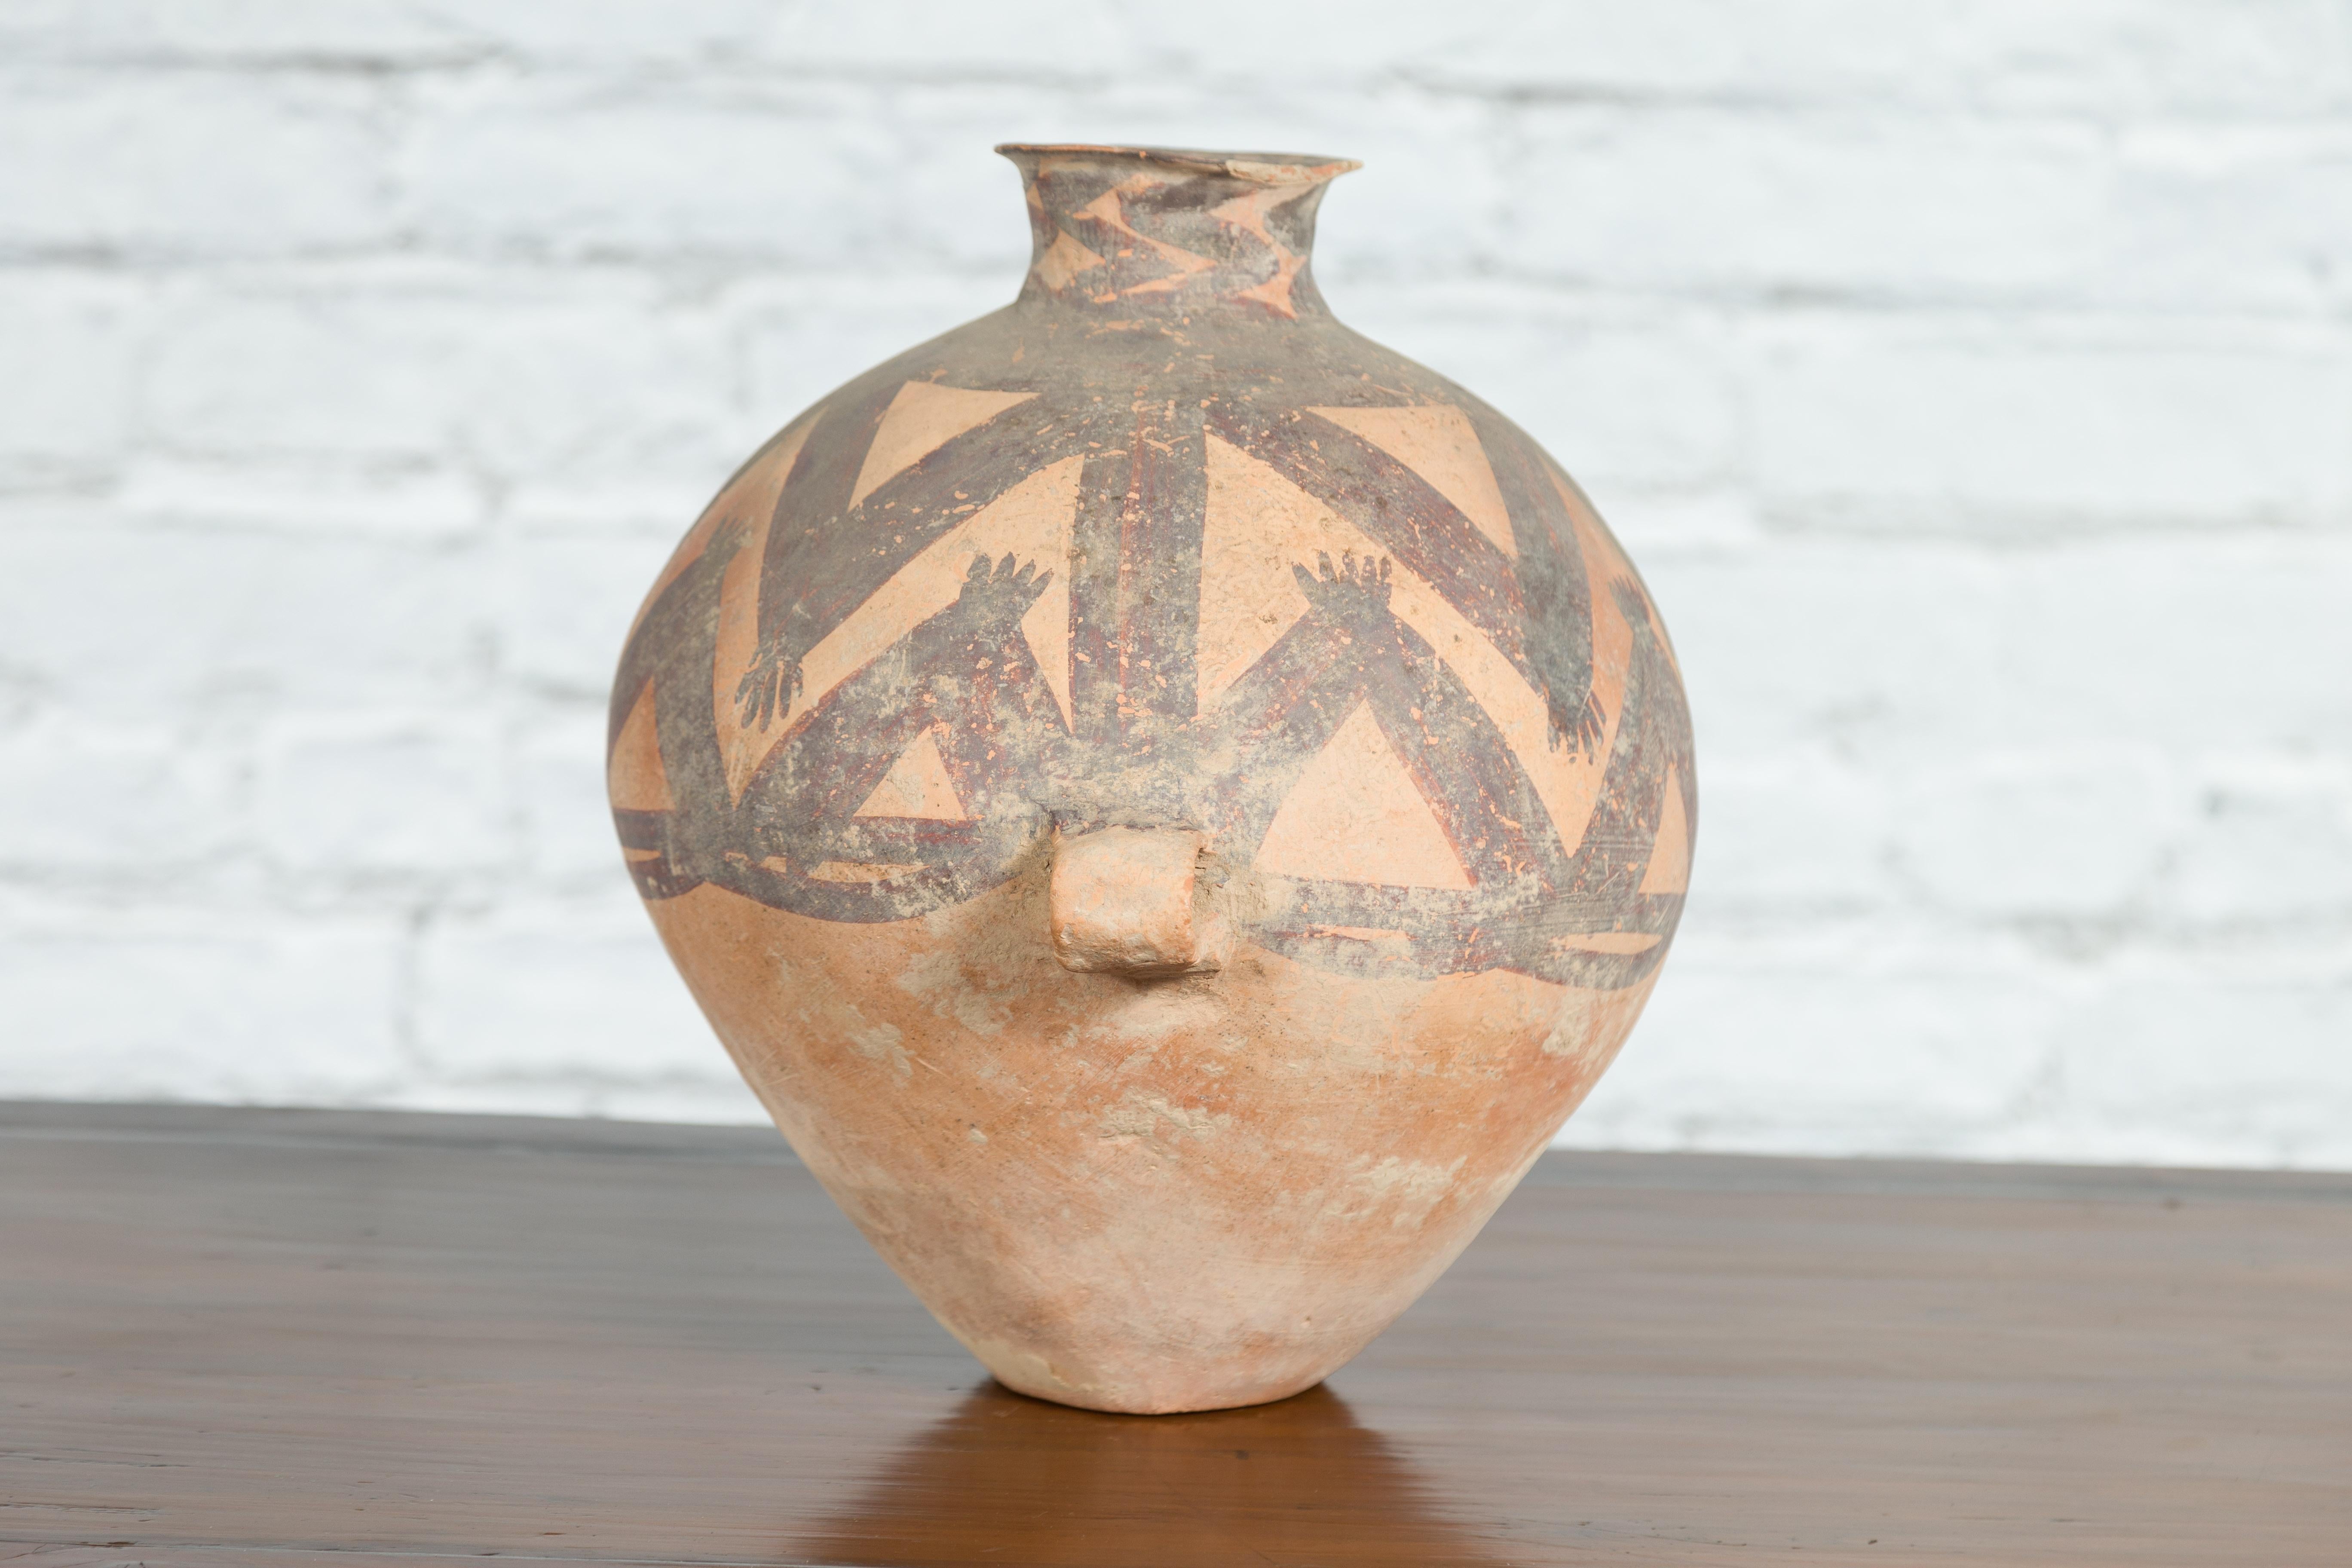 Chinese Neolithic Period 4000 BC Terracotta Storage Jar with Geometric Décor 8